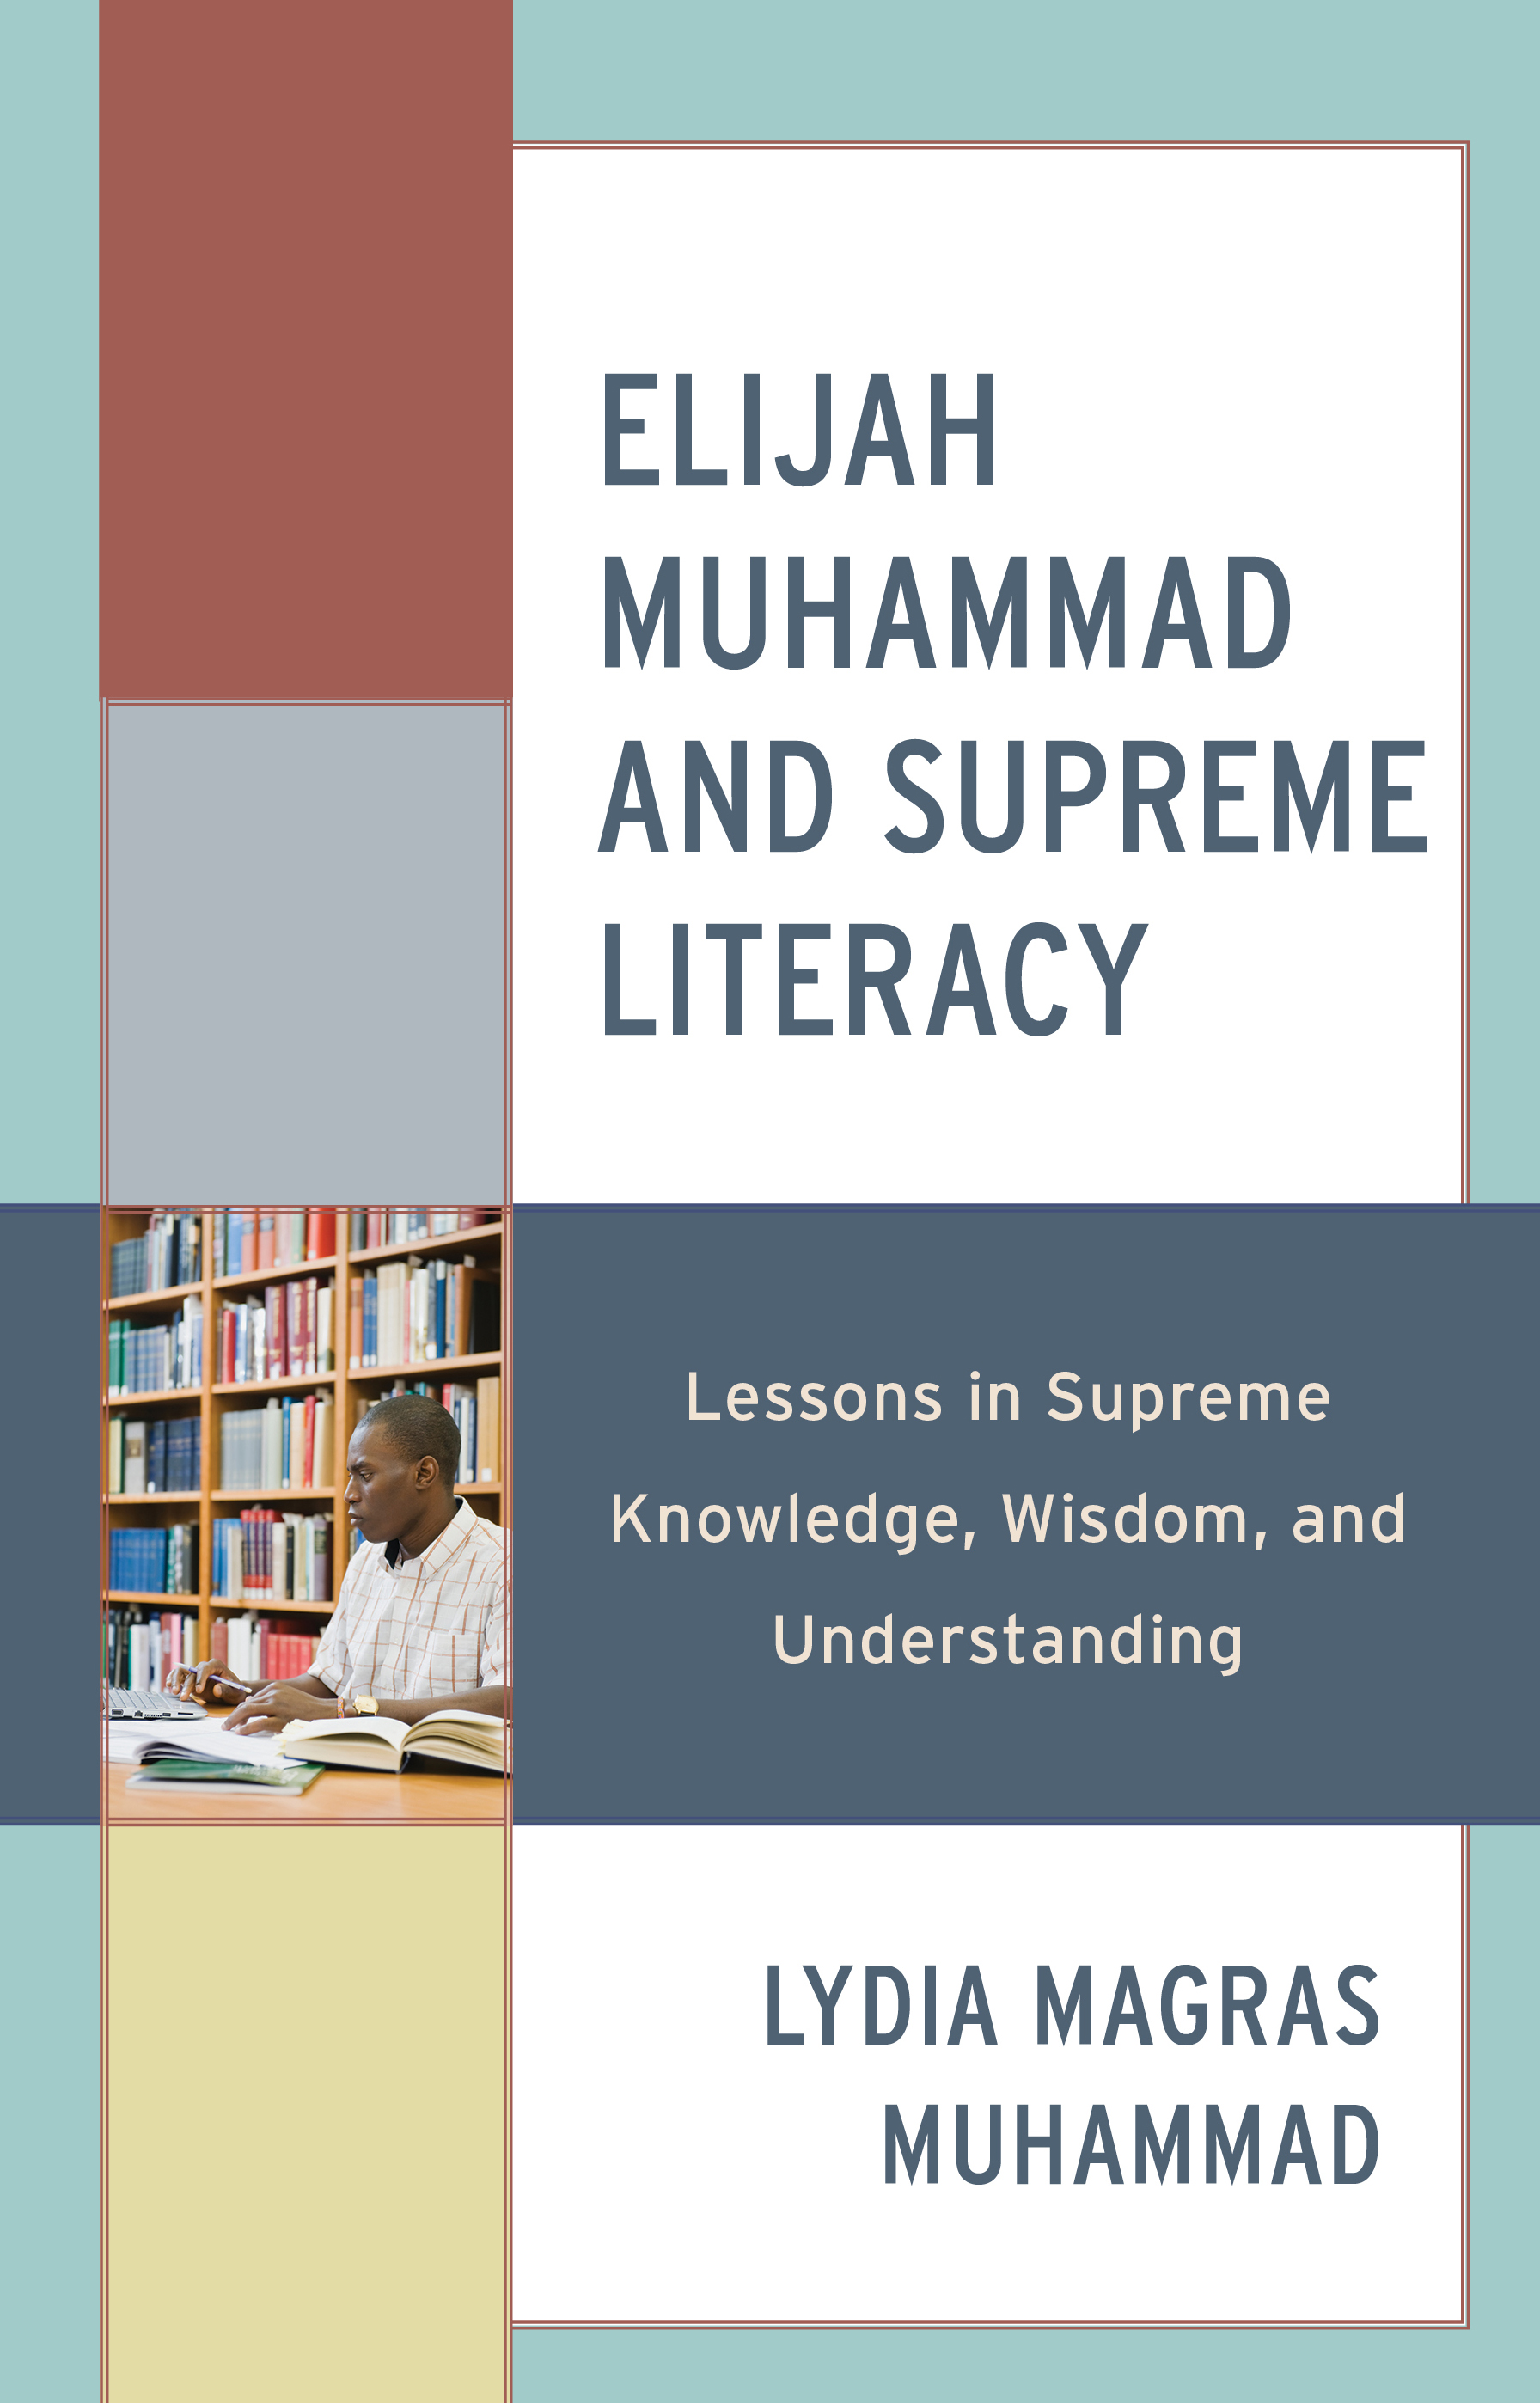 Elijah Muhammad and Supreme Literacy: Lessons in Supreme Knowledge, Wisdom, and Understanding